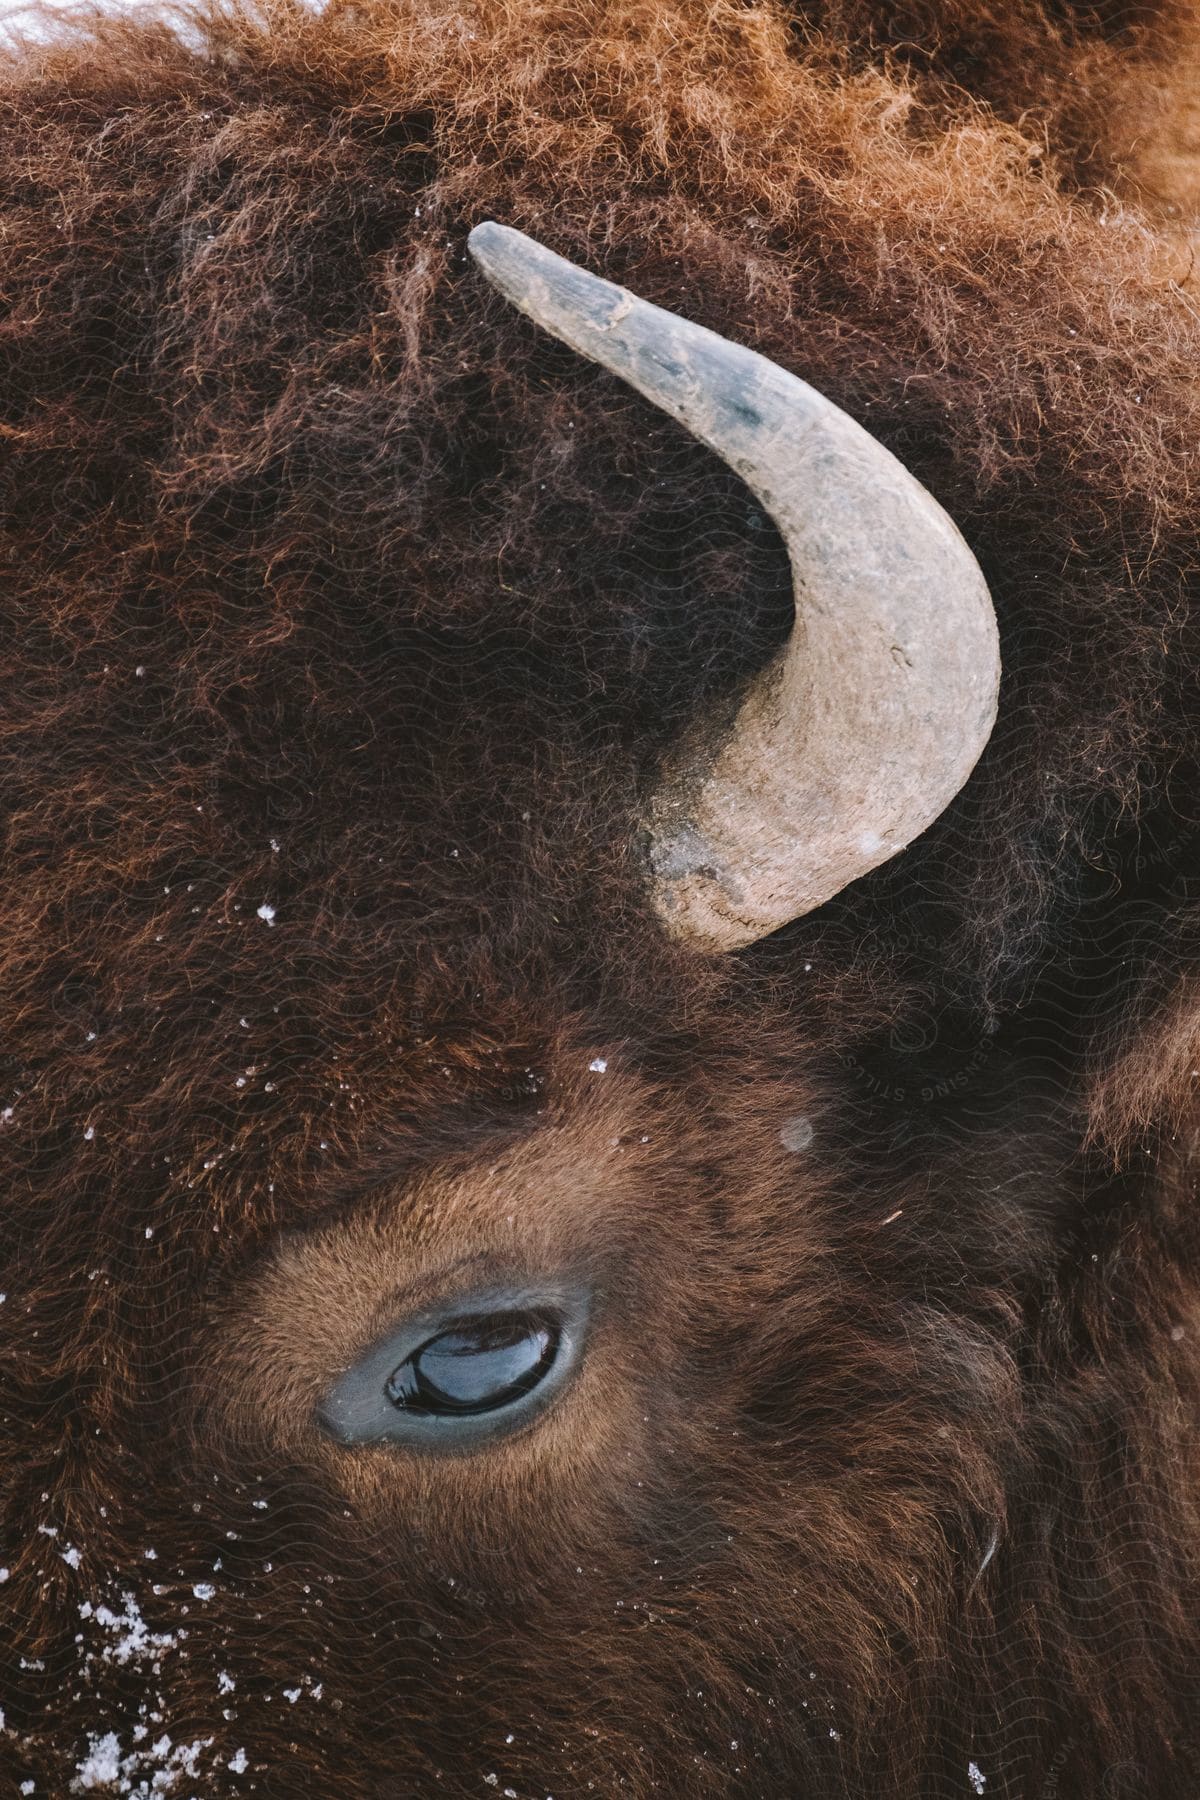 The eye and horn of a bison with snow on its fur.